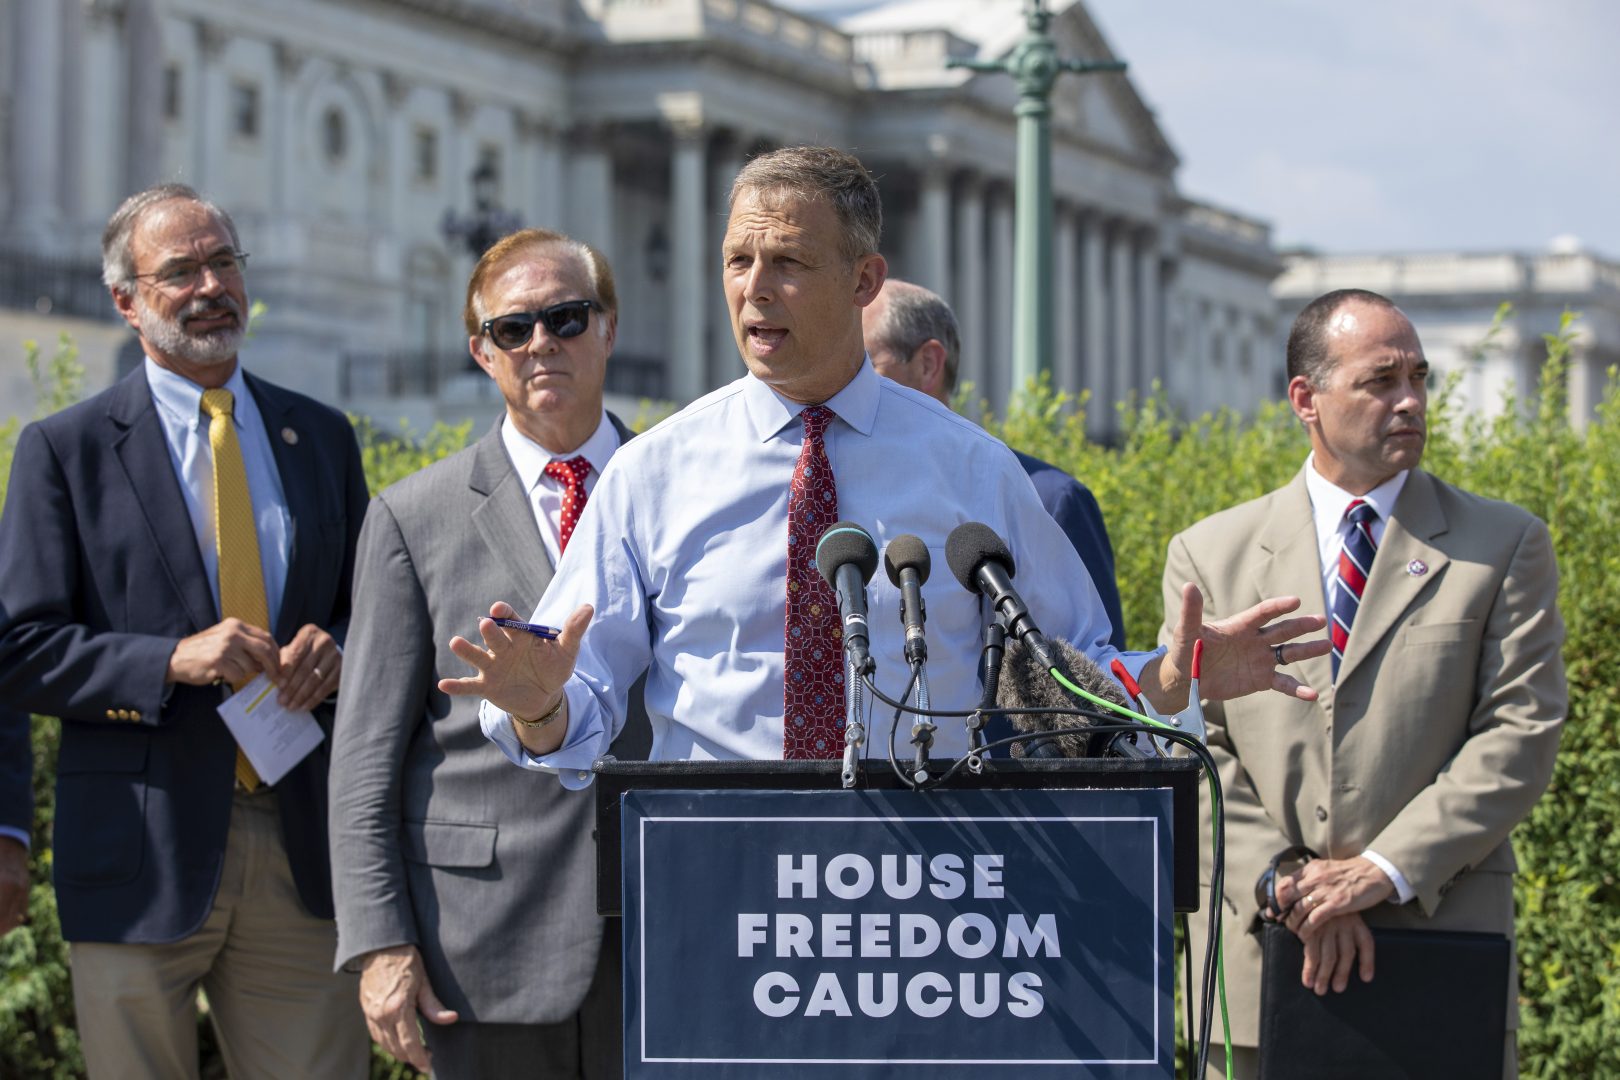 Rep. Scott Perry, R-Pa., discusses the infrastructure bill making its way through congress during a news conference held by the House Freedom Caucus on Capitol Hill in Washington, Monday, Aug. 23, 2021. 